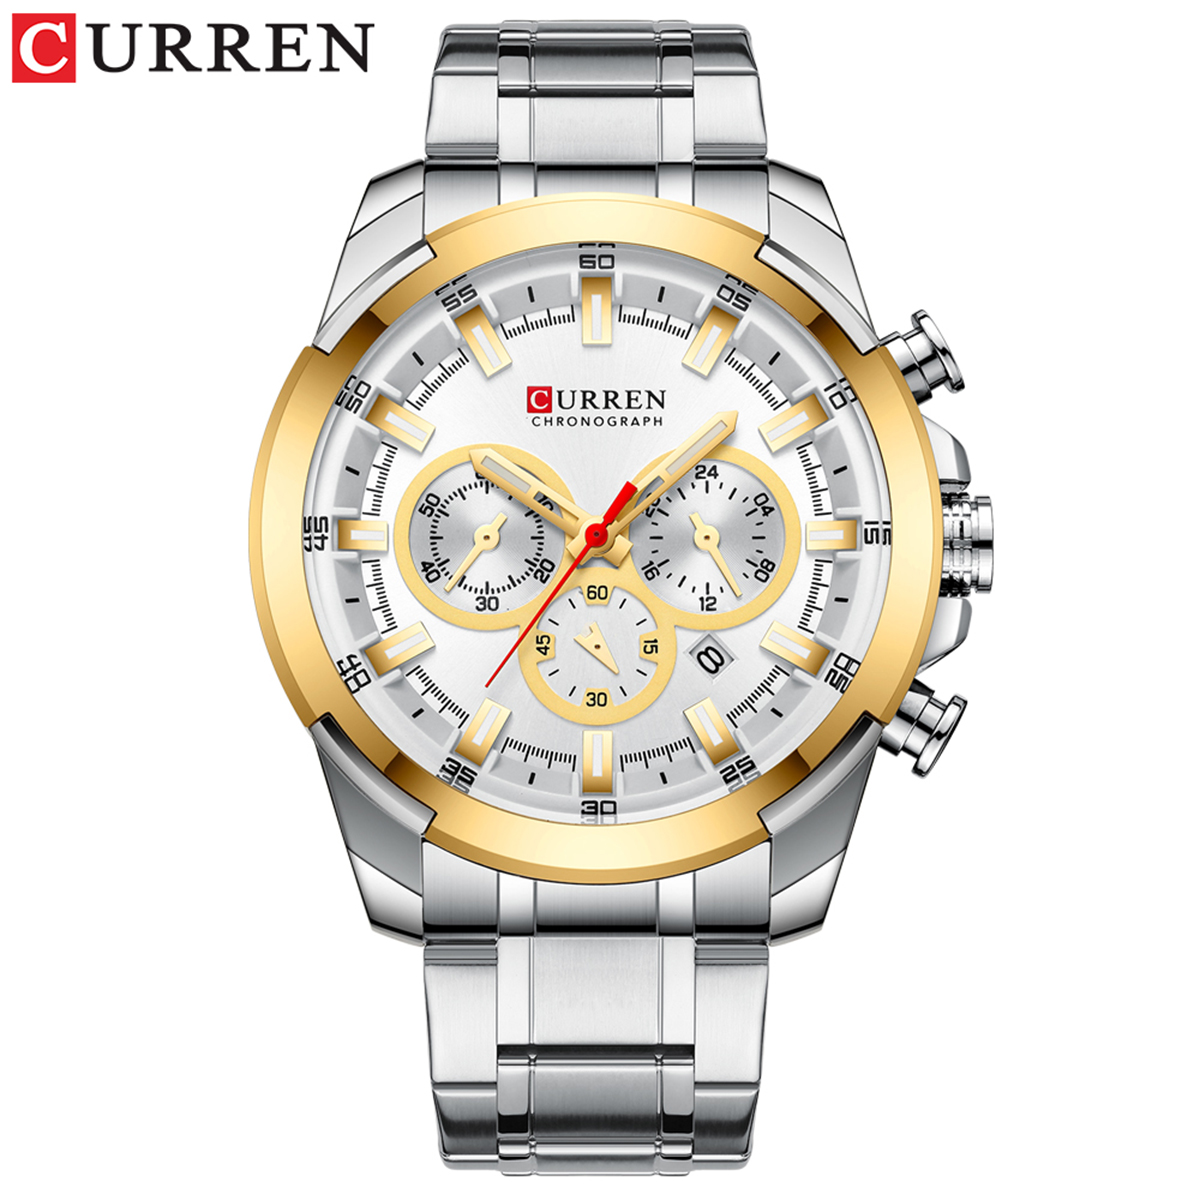 CURREN 8361 Quartz Man Wristwatch Watch for Male Men Watches with Calendar Indicator Date Waterproof Luminous Hands Three Sub-Dials Second Minute Microsecond Chronograph Stainless Steel Strap Band Wea - image 2 of 7